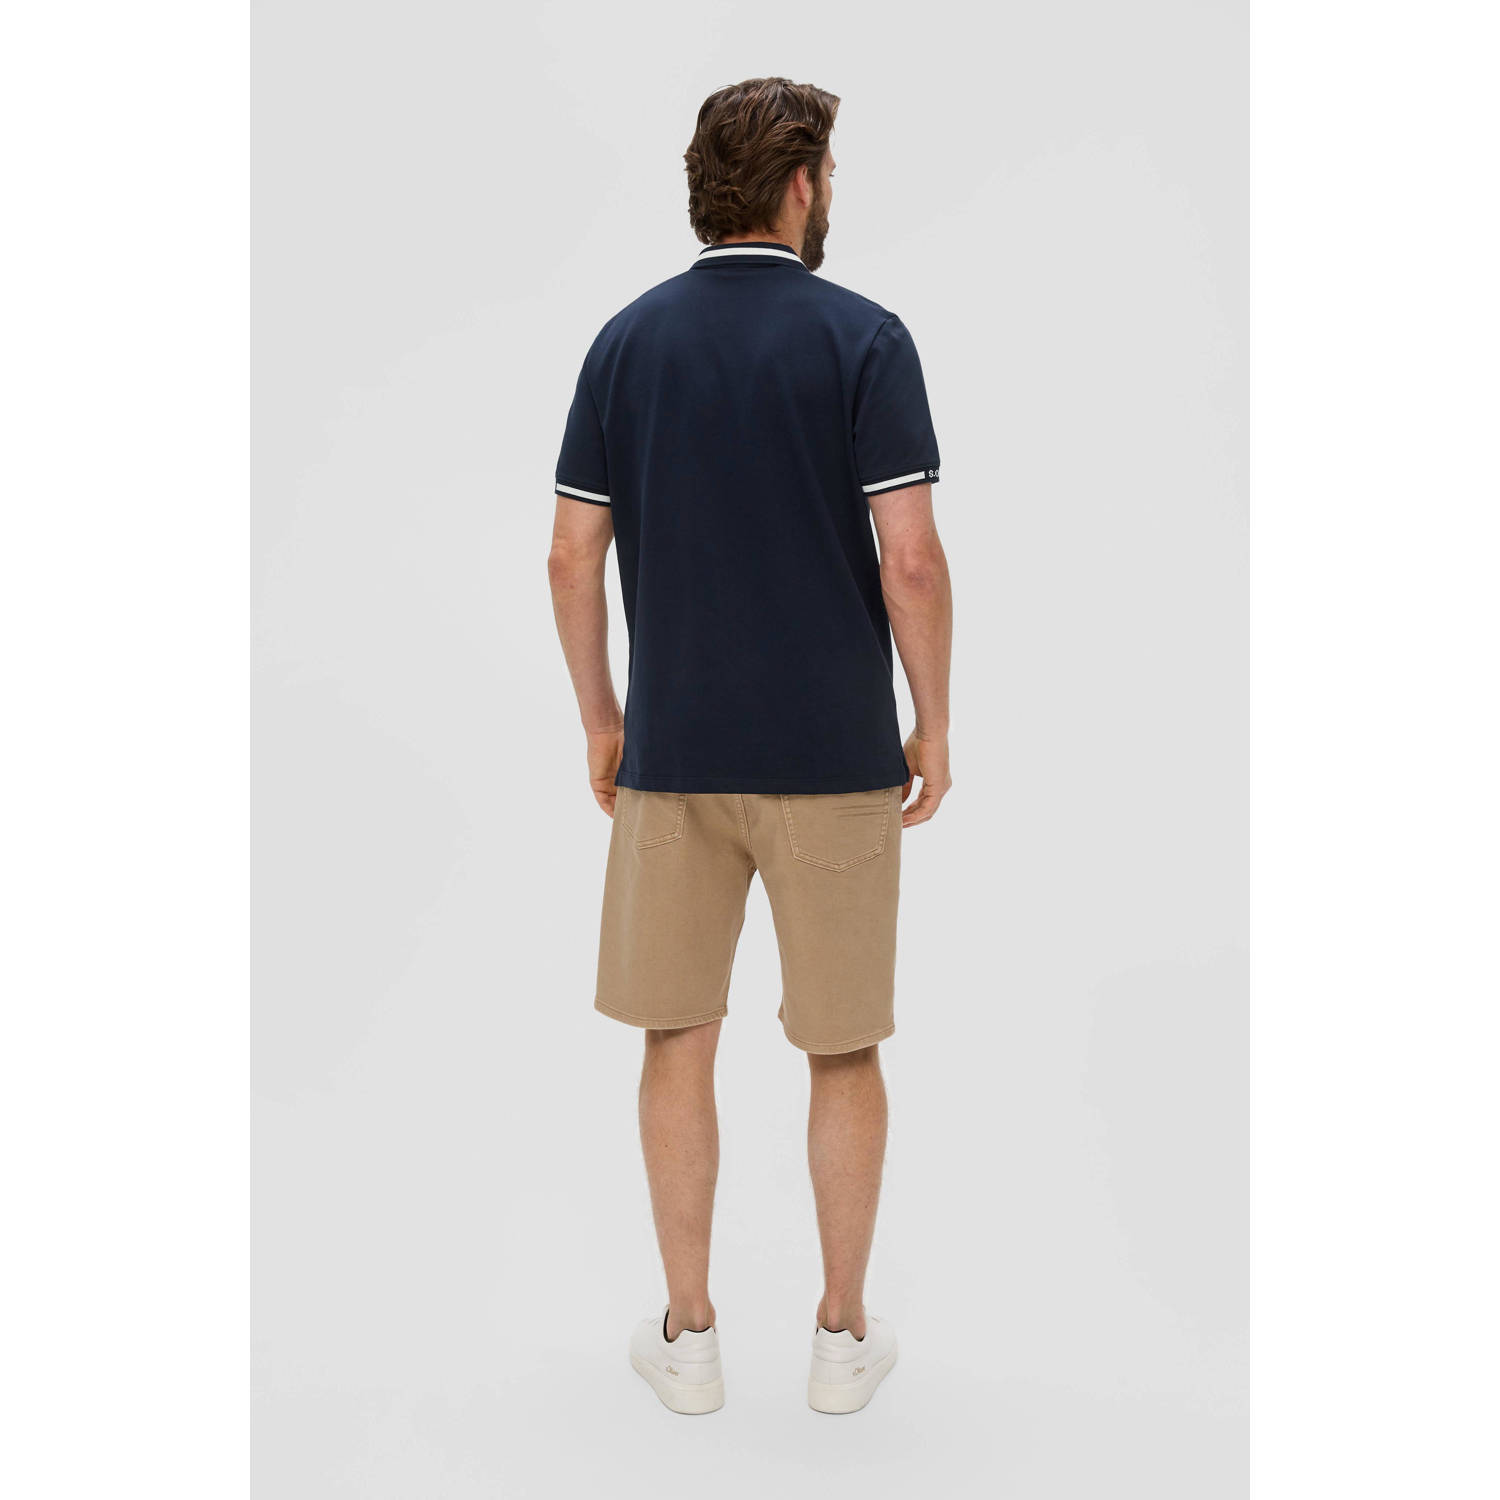 s.Oliver polo donkerblauw wit